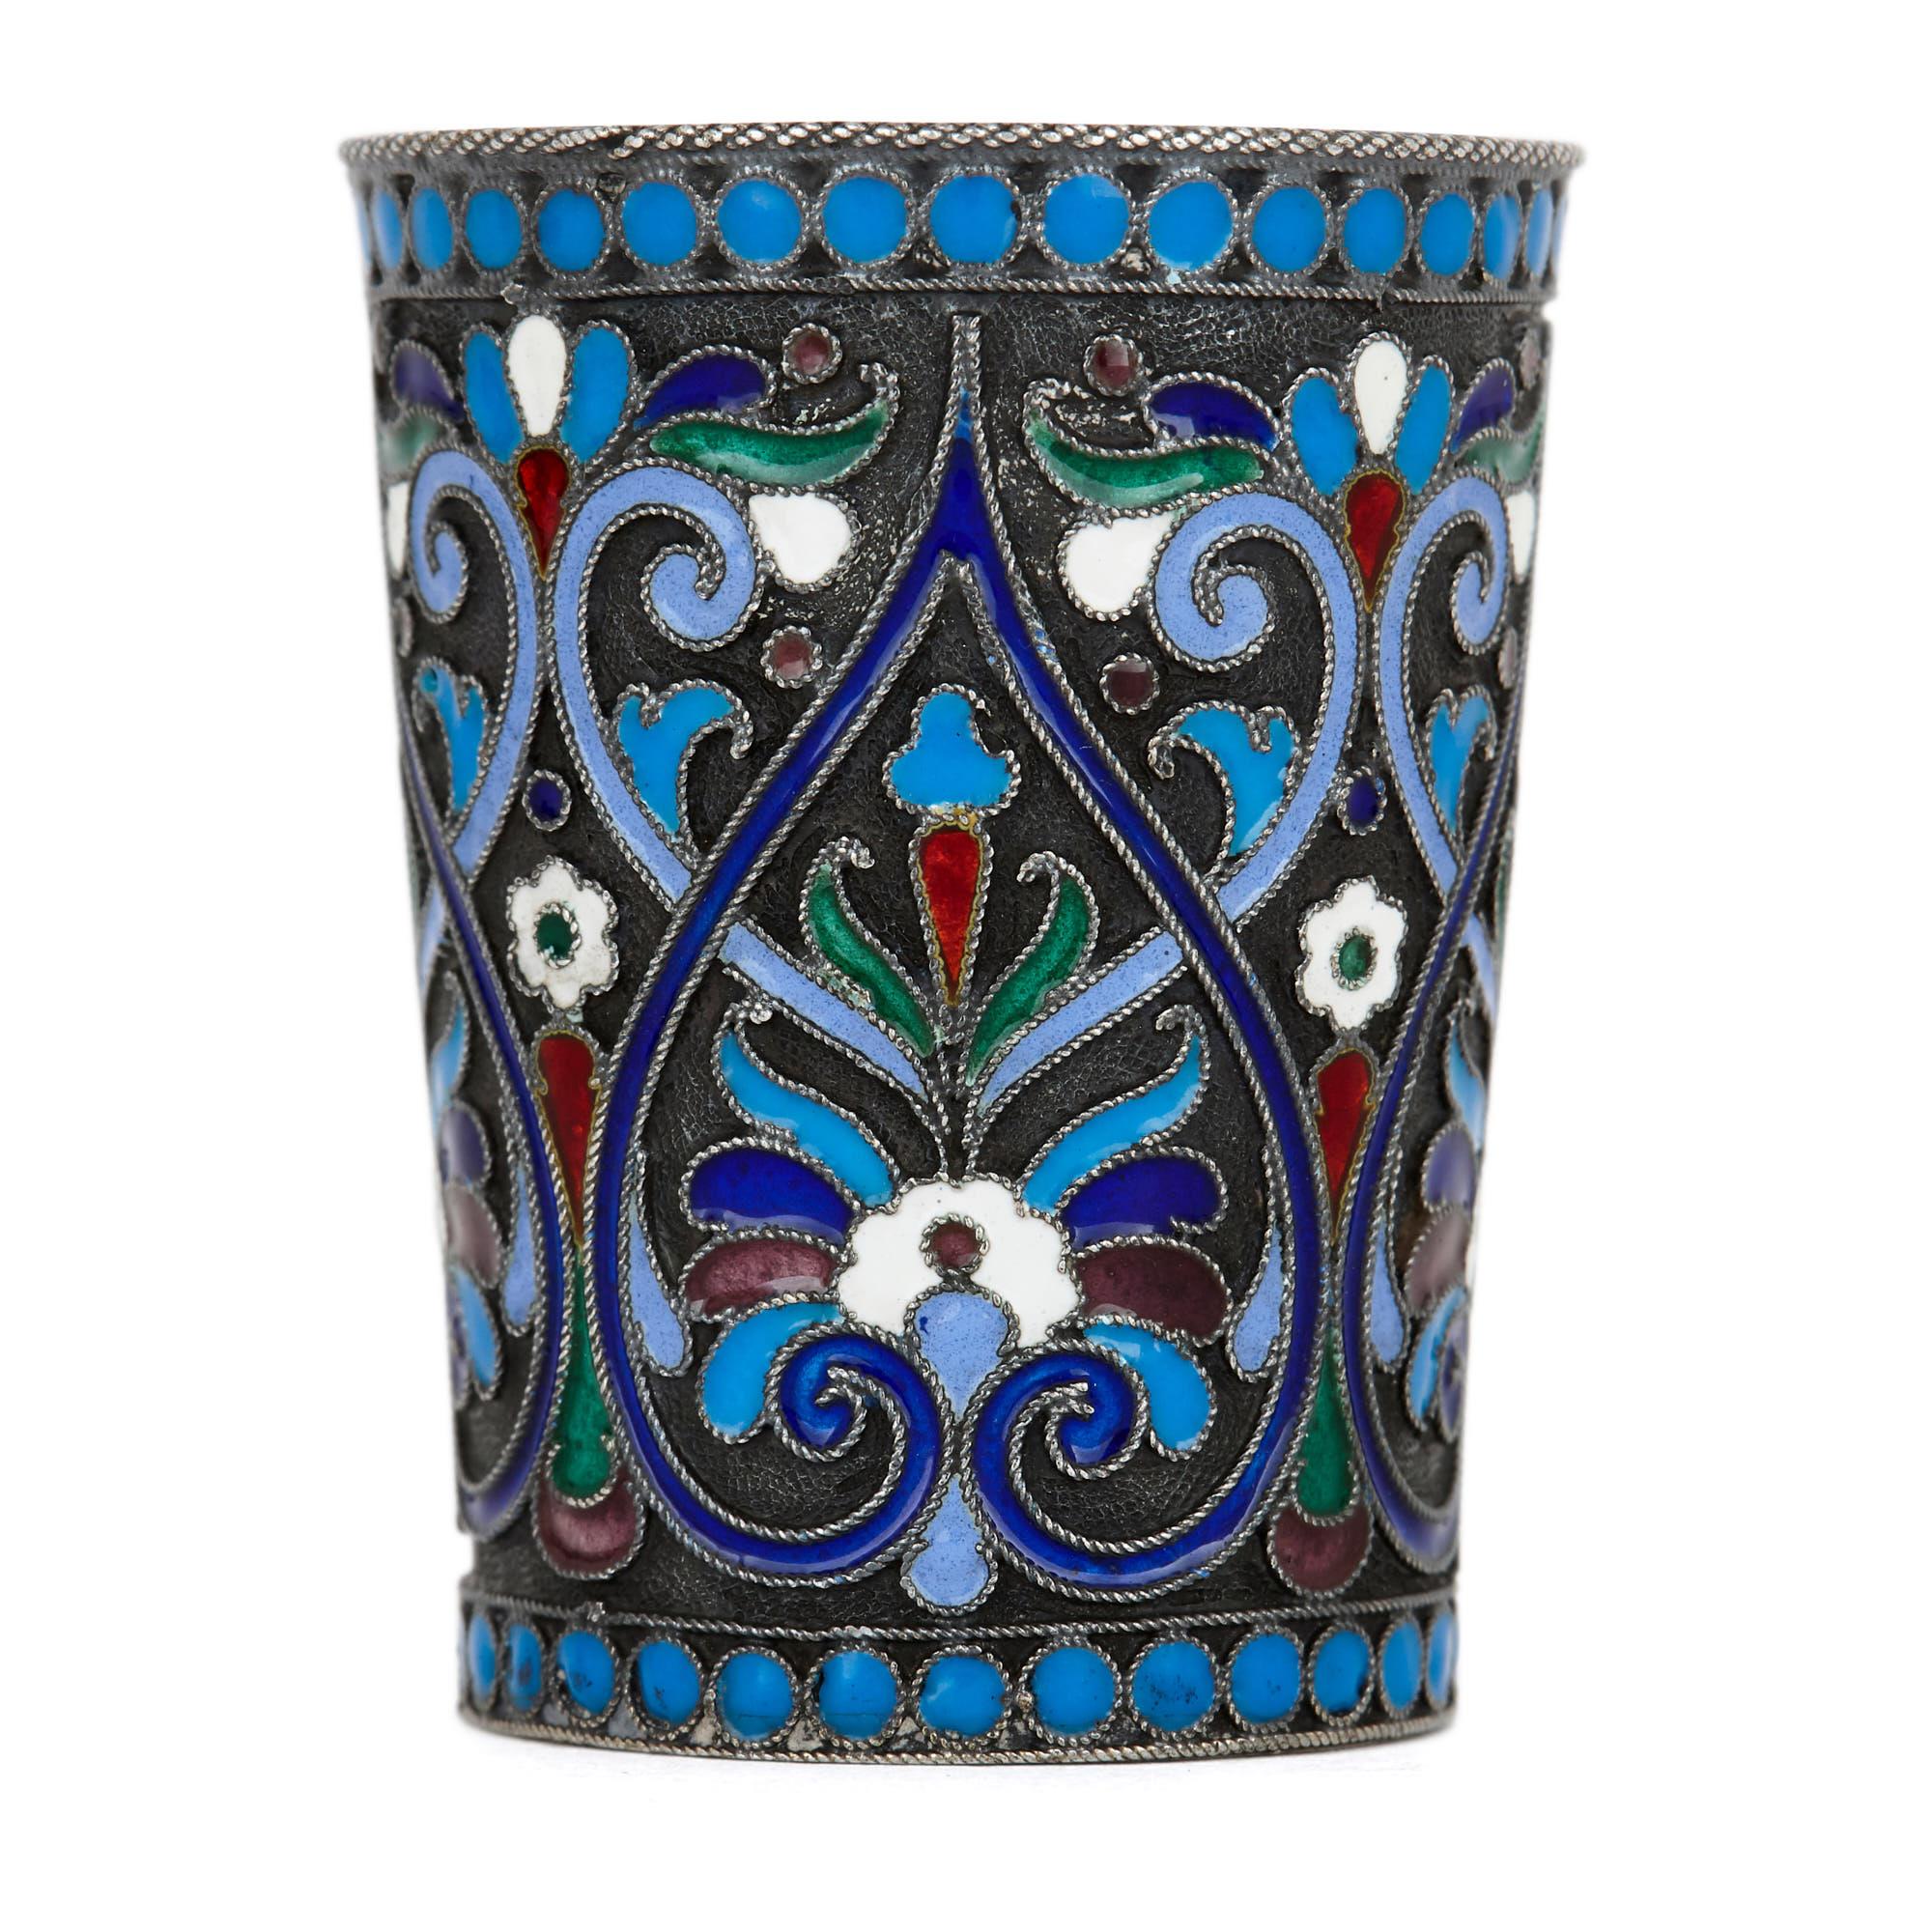 This matching pair of early 20th century Russian drinking cups (or vodka cups, also known as beakers) are made of solid silver. Cylindrical in form, the cups narrow slightly from the rim to the base. The cloisonné enamelwork of each cup is extensive